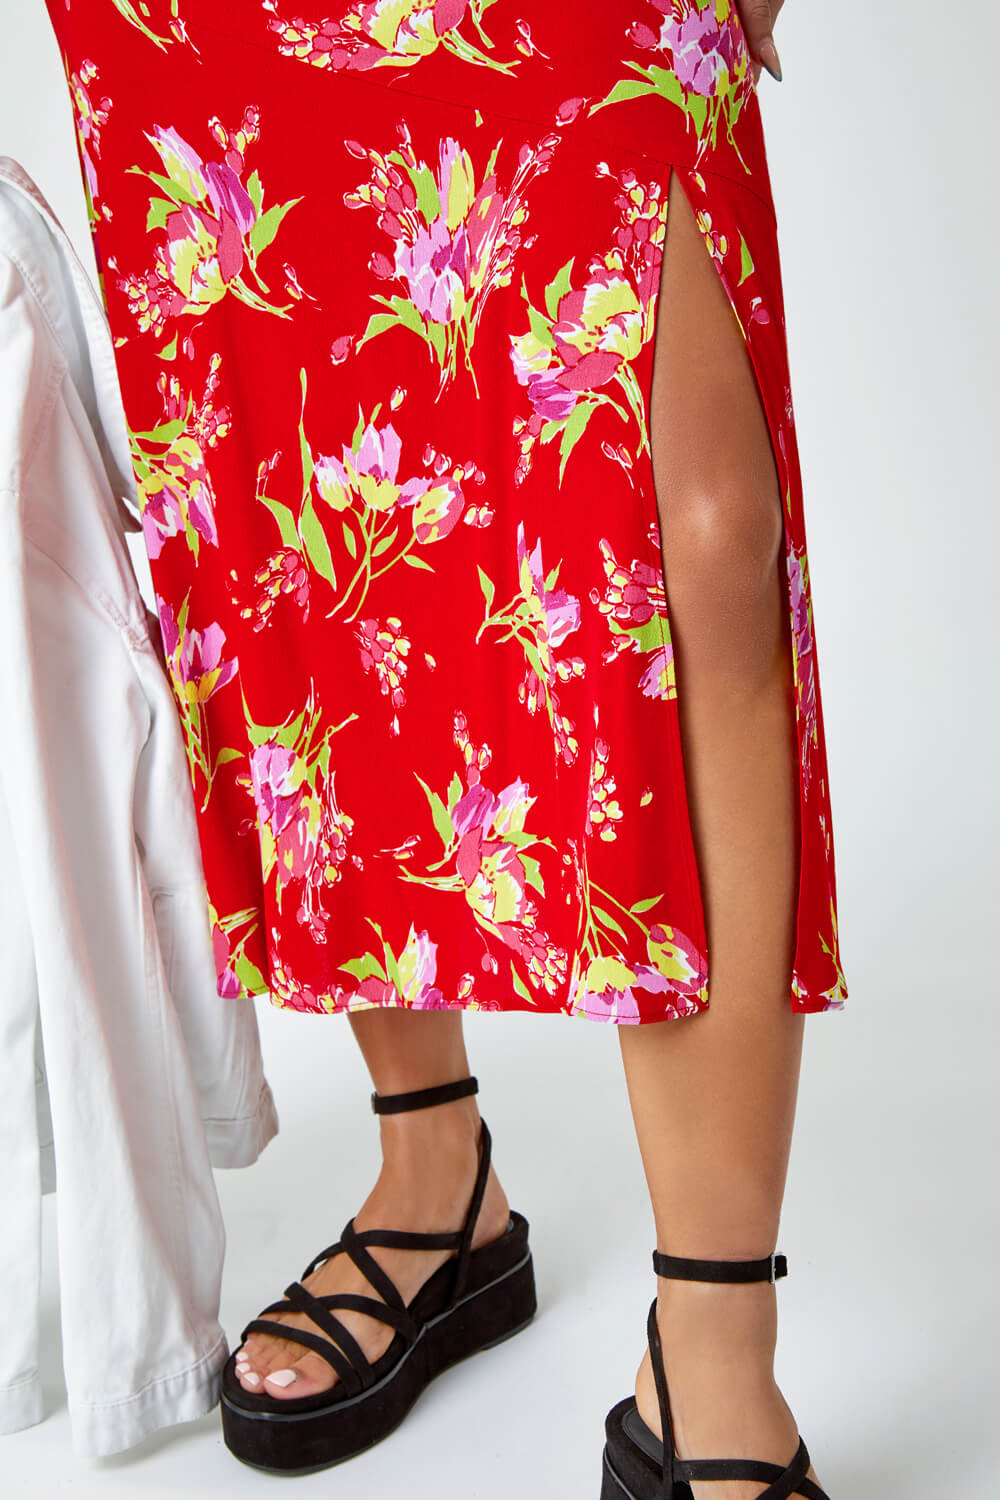 Red Floral Asymmetric Frill Midi Skirt, Image 5 of 5